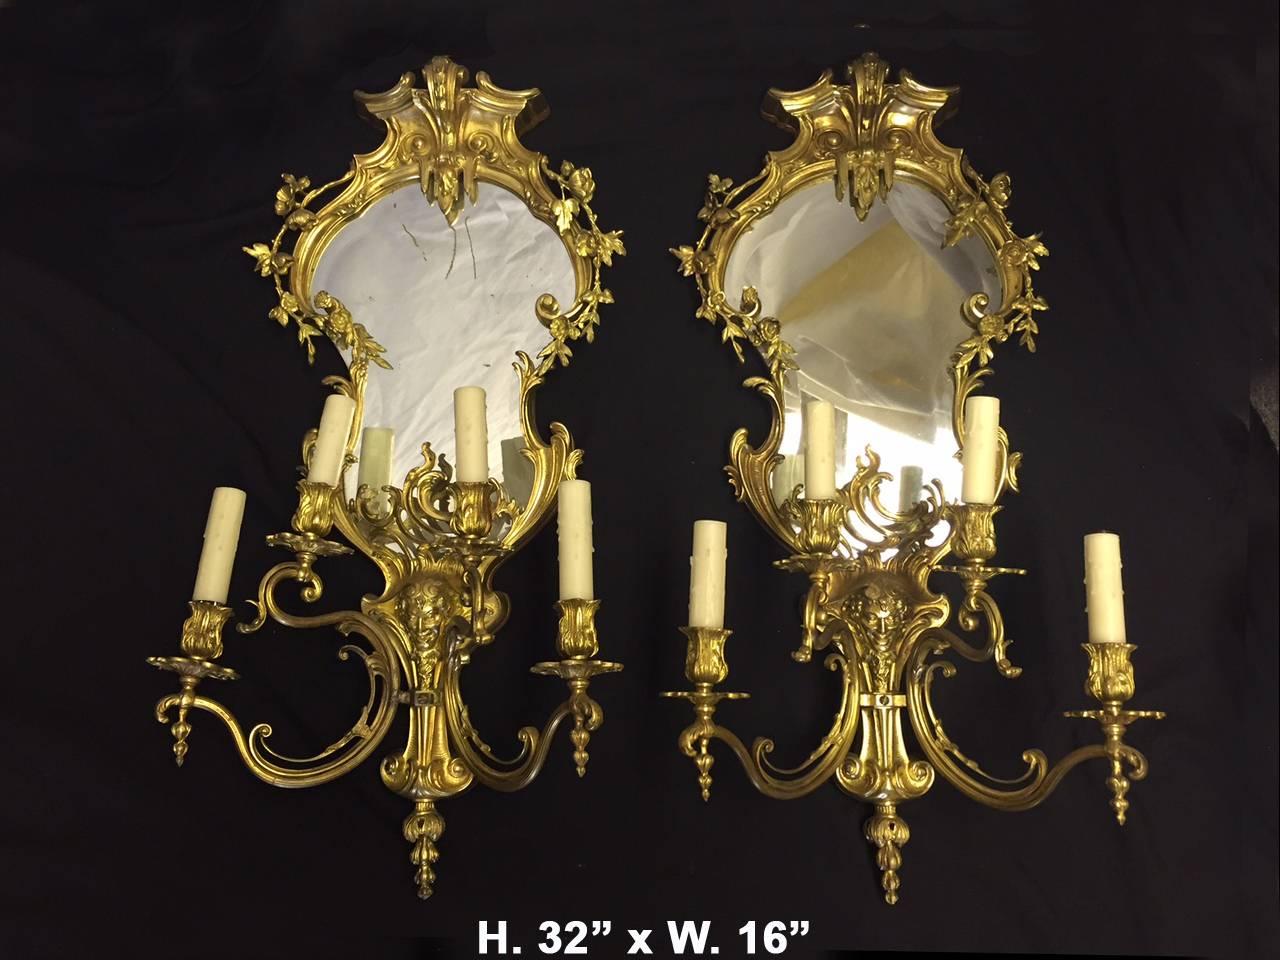 Attractive pair of French Louis XV style gilt bronze four light girandole mirrors with floral garland draped over beveled mirrors, circa 1900.

 